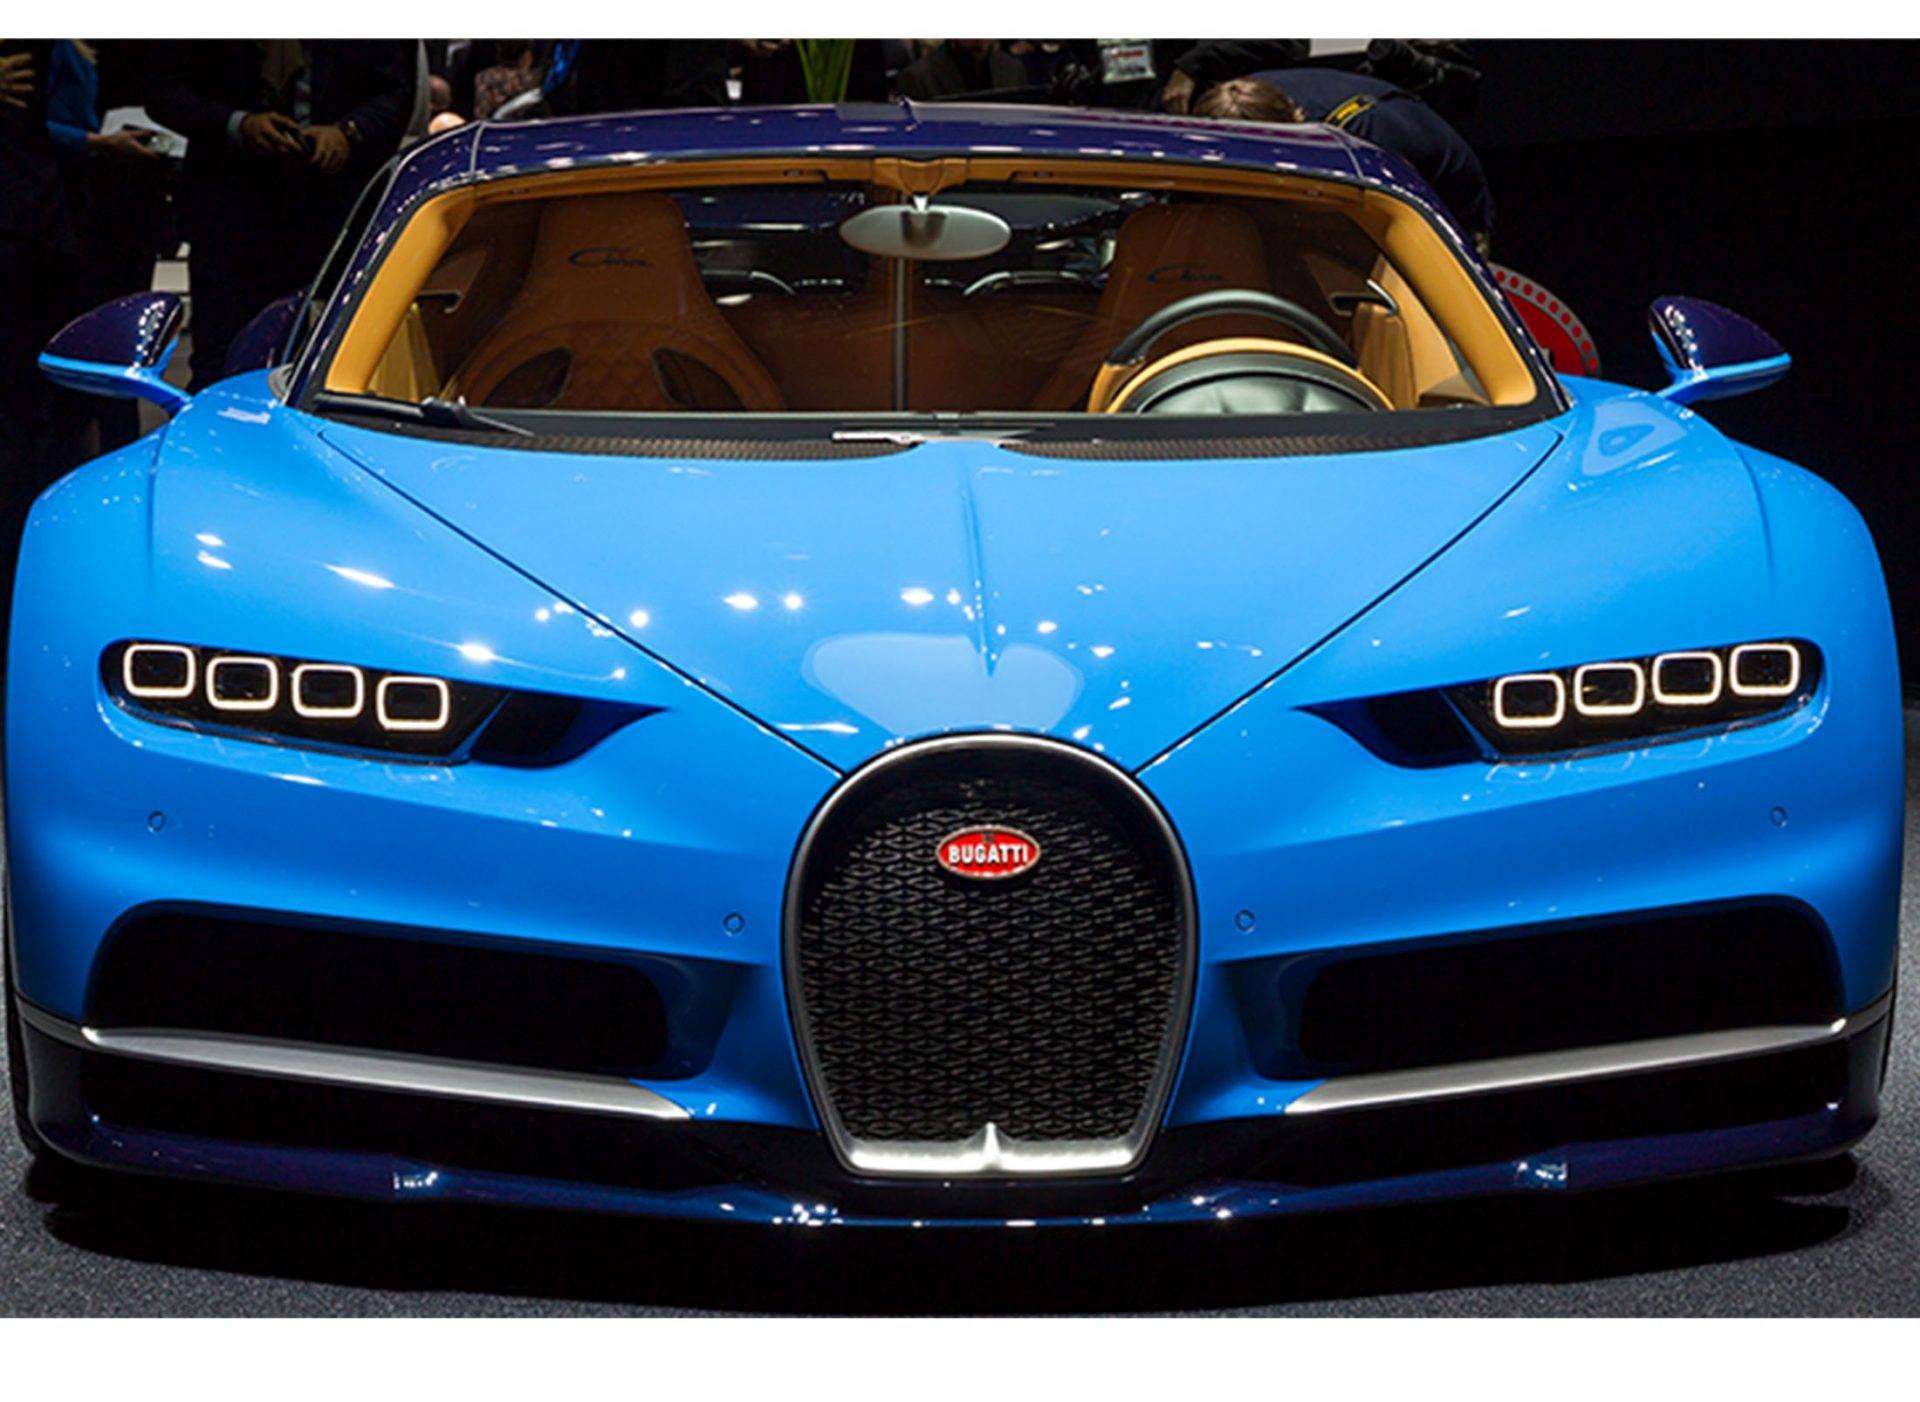 Bugatti Blue Car Laminated Vinyl Cover Self-Adhesive for Desk and Tables